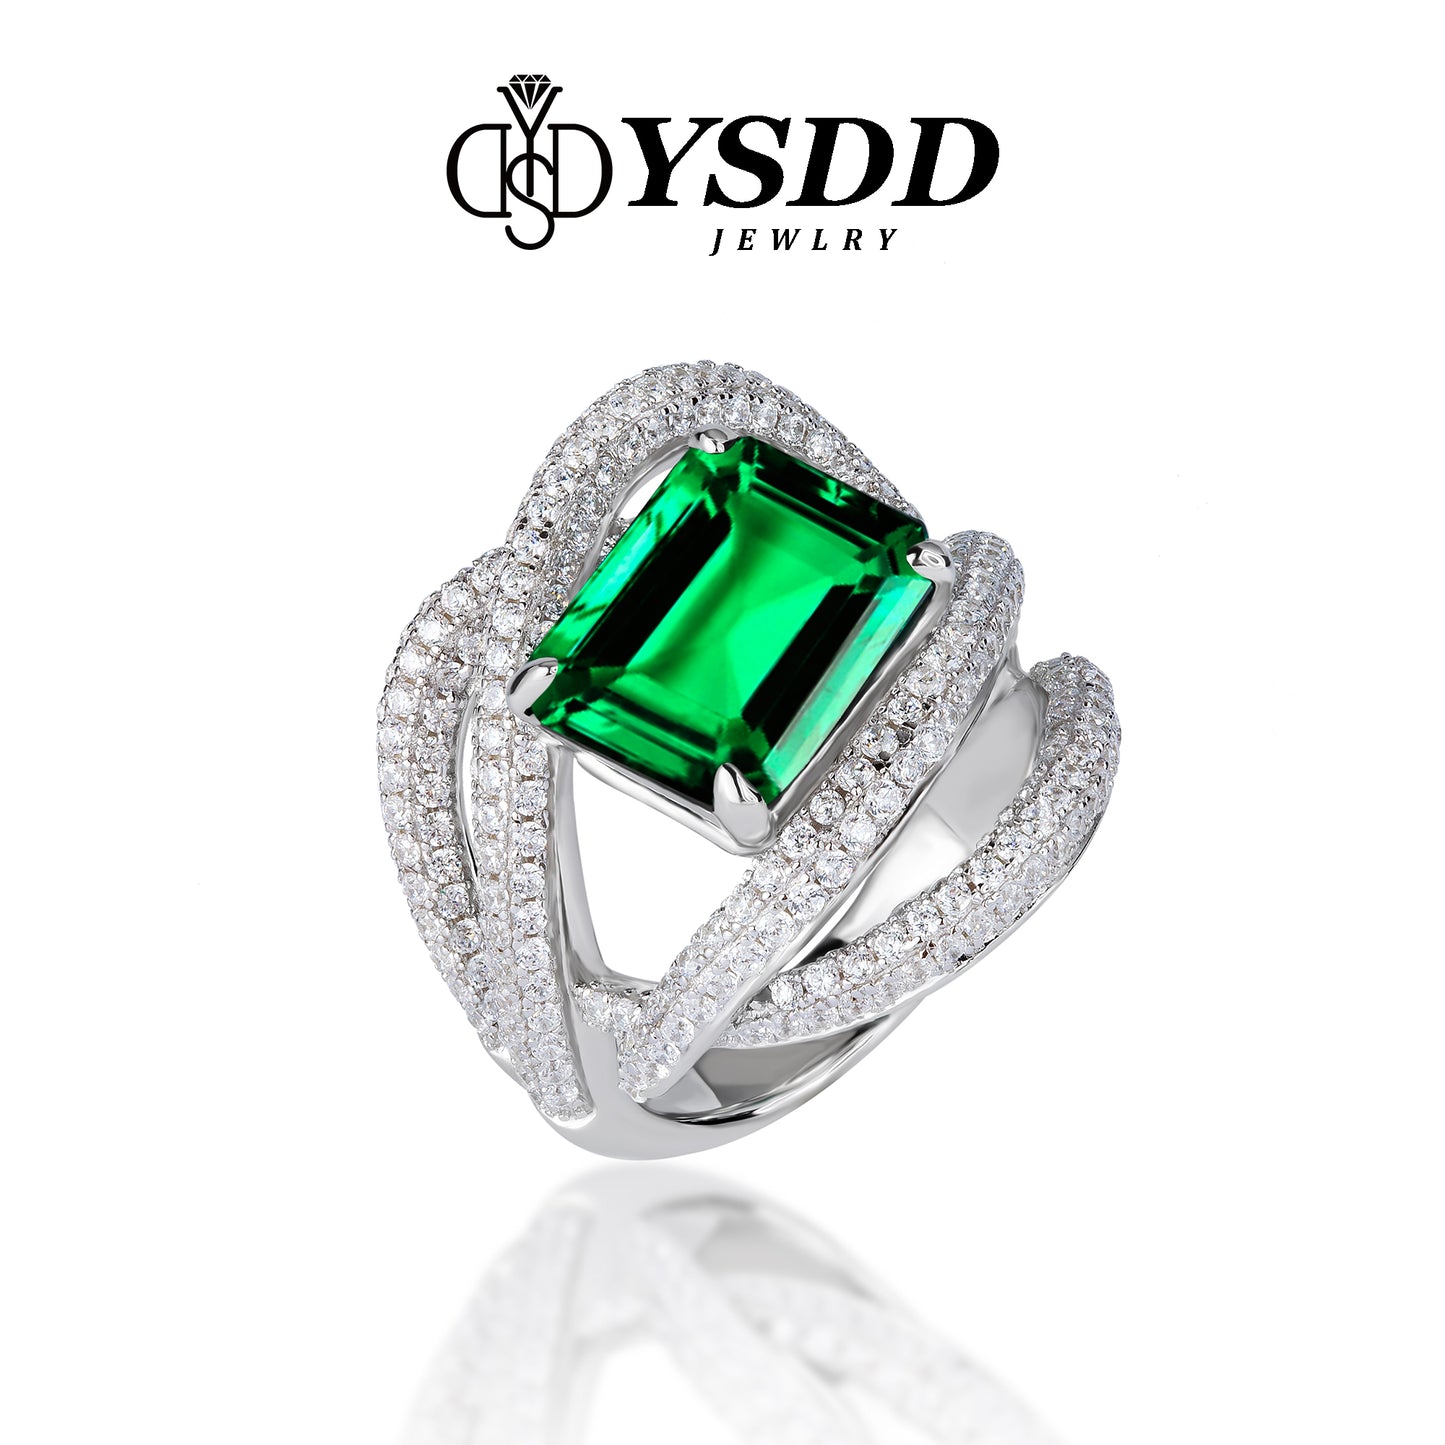 【#609 Medusa】Luxury 4CT Synthetic Emerald Cocktail Ring in 925 Sterling Silver